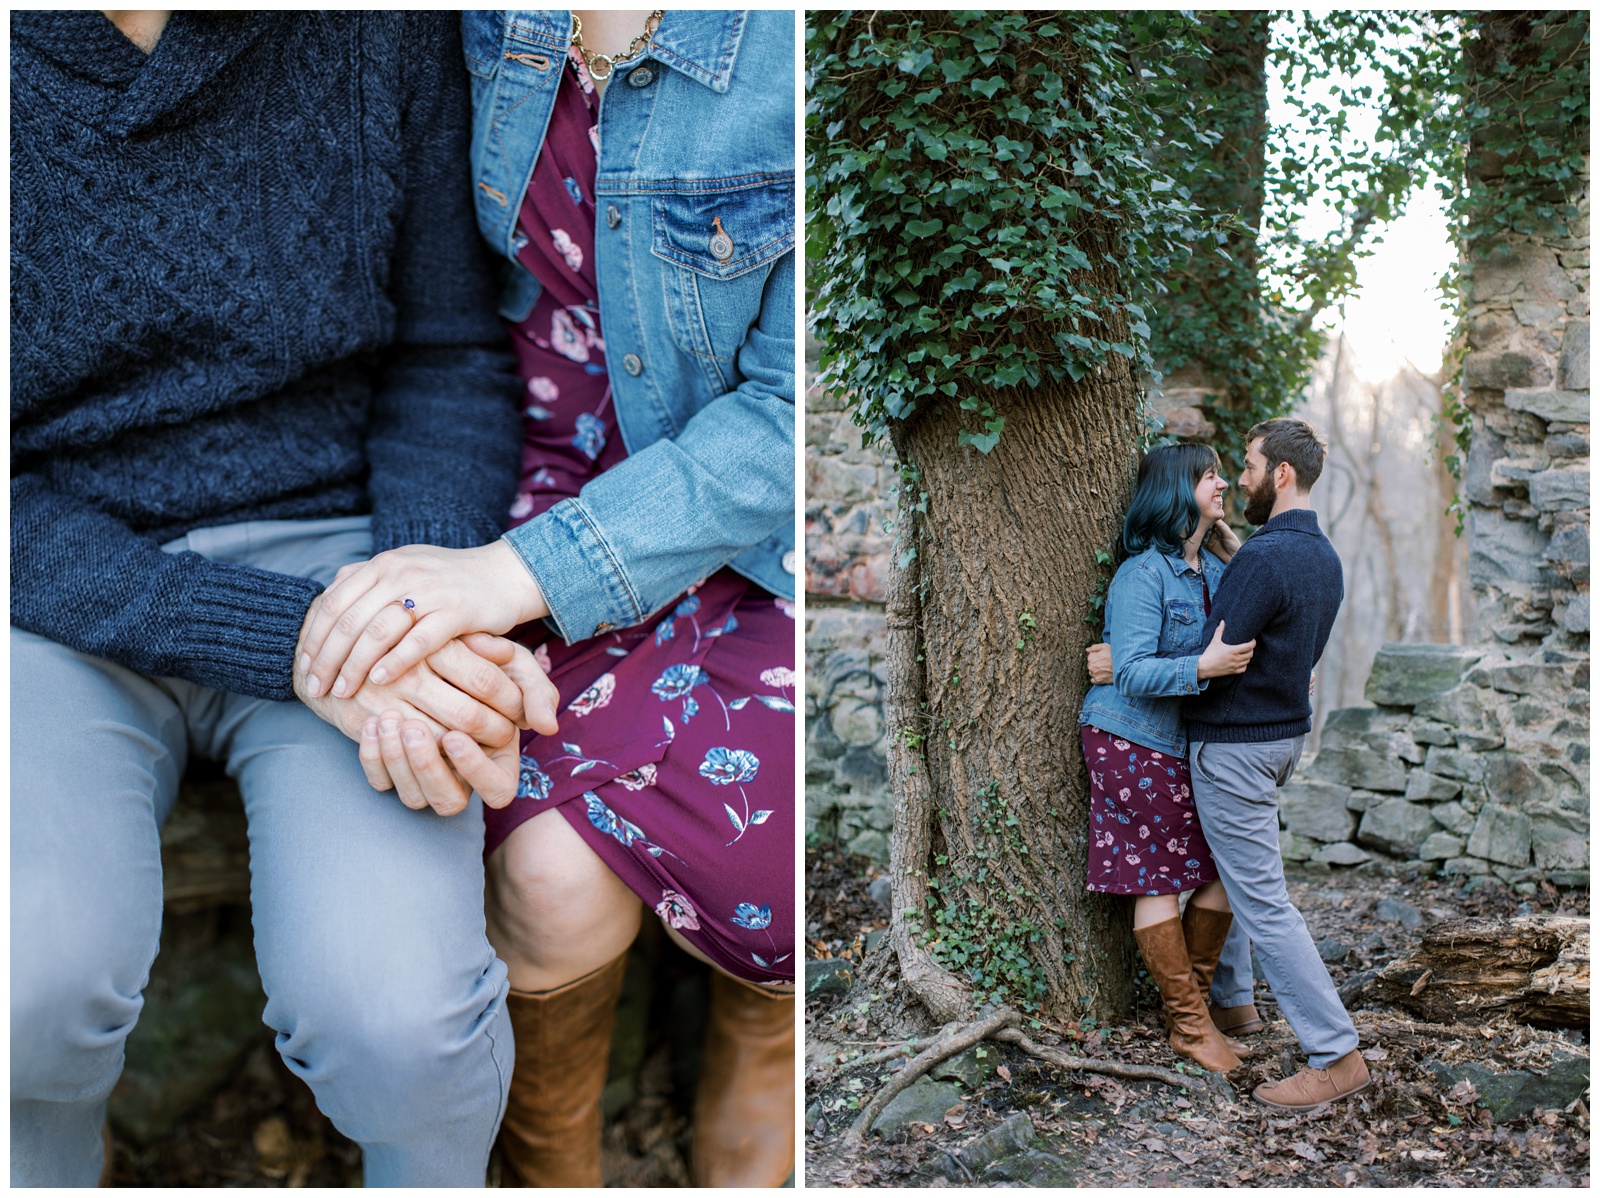 How To Choose A Unique Engagement Session Location - The Ruins At Patapsco State Park - Maryland Engagement Photography